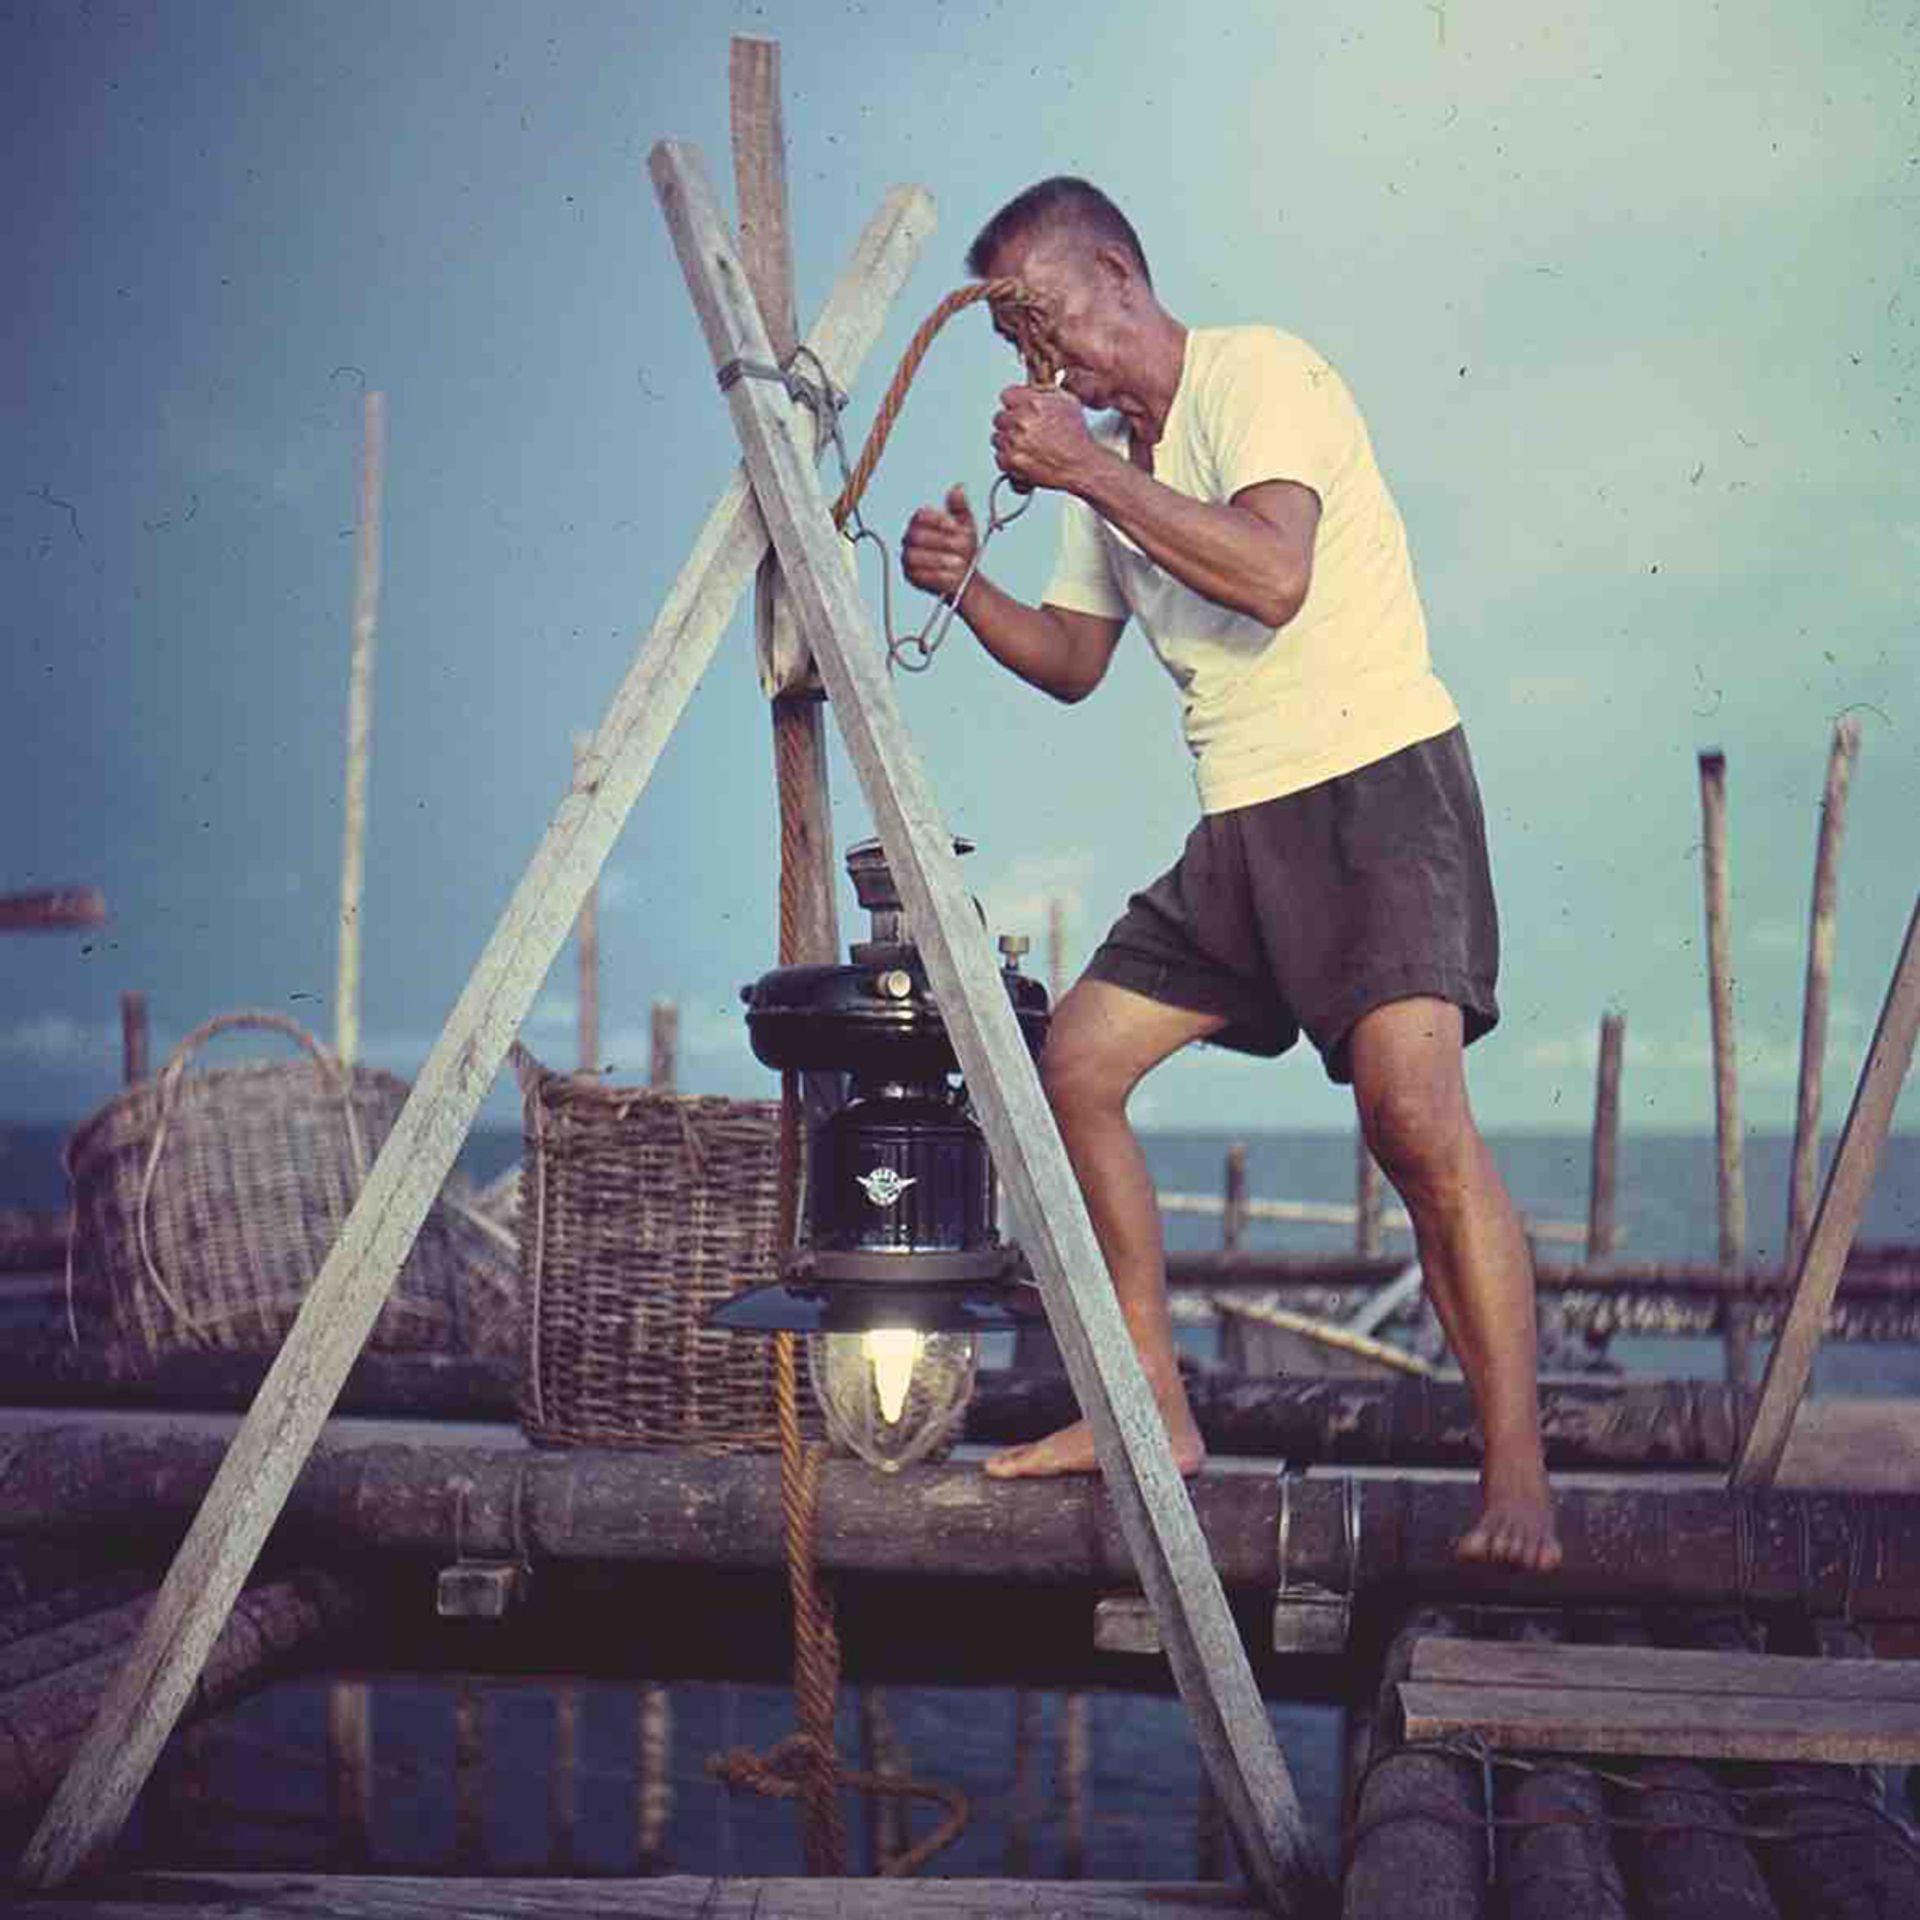 As dusk falls, the kelong is a hive of activity as fishermen prepare themselves for the night's catch. Here you see the powerful kerosene lamps lit, and then lowered just above the water to attract the fish where the net enclosure is located. Photographed in the late 1960s at a kelong off Tuas.